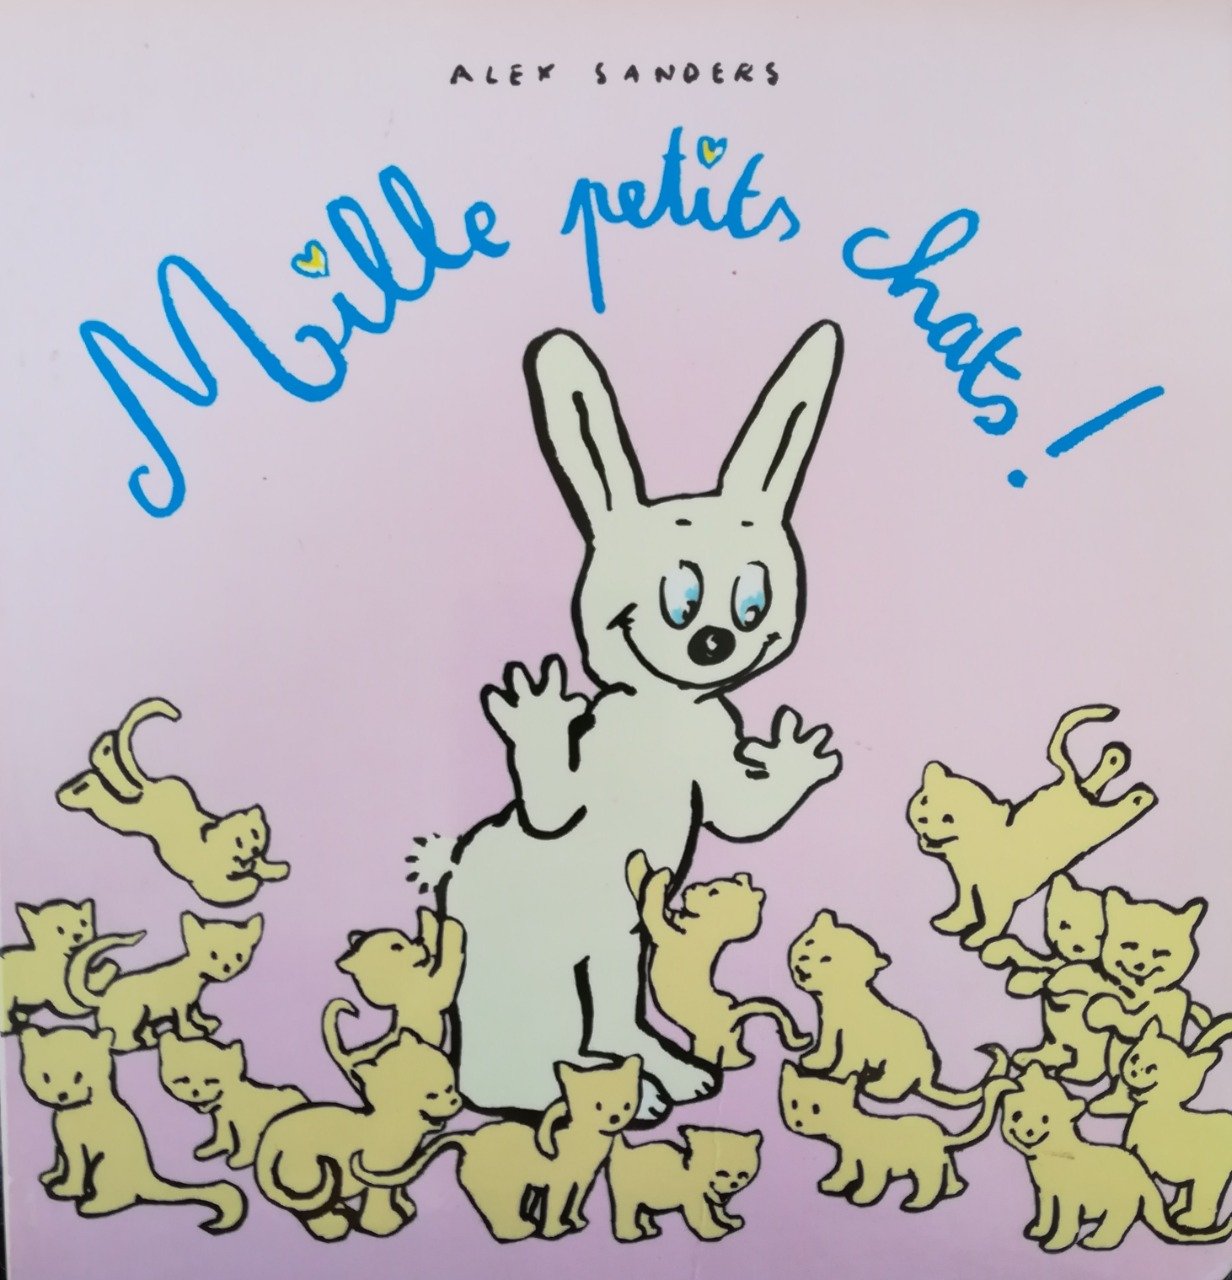 Mille petits chats